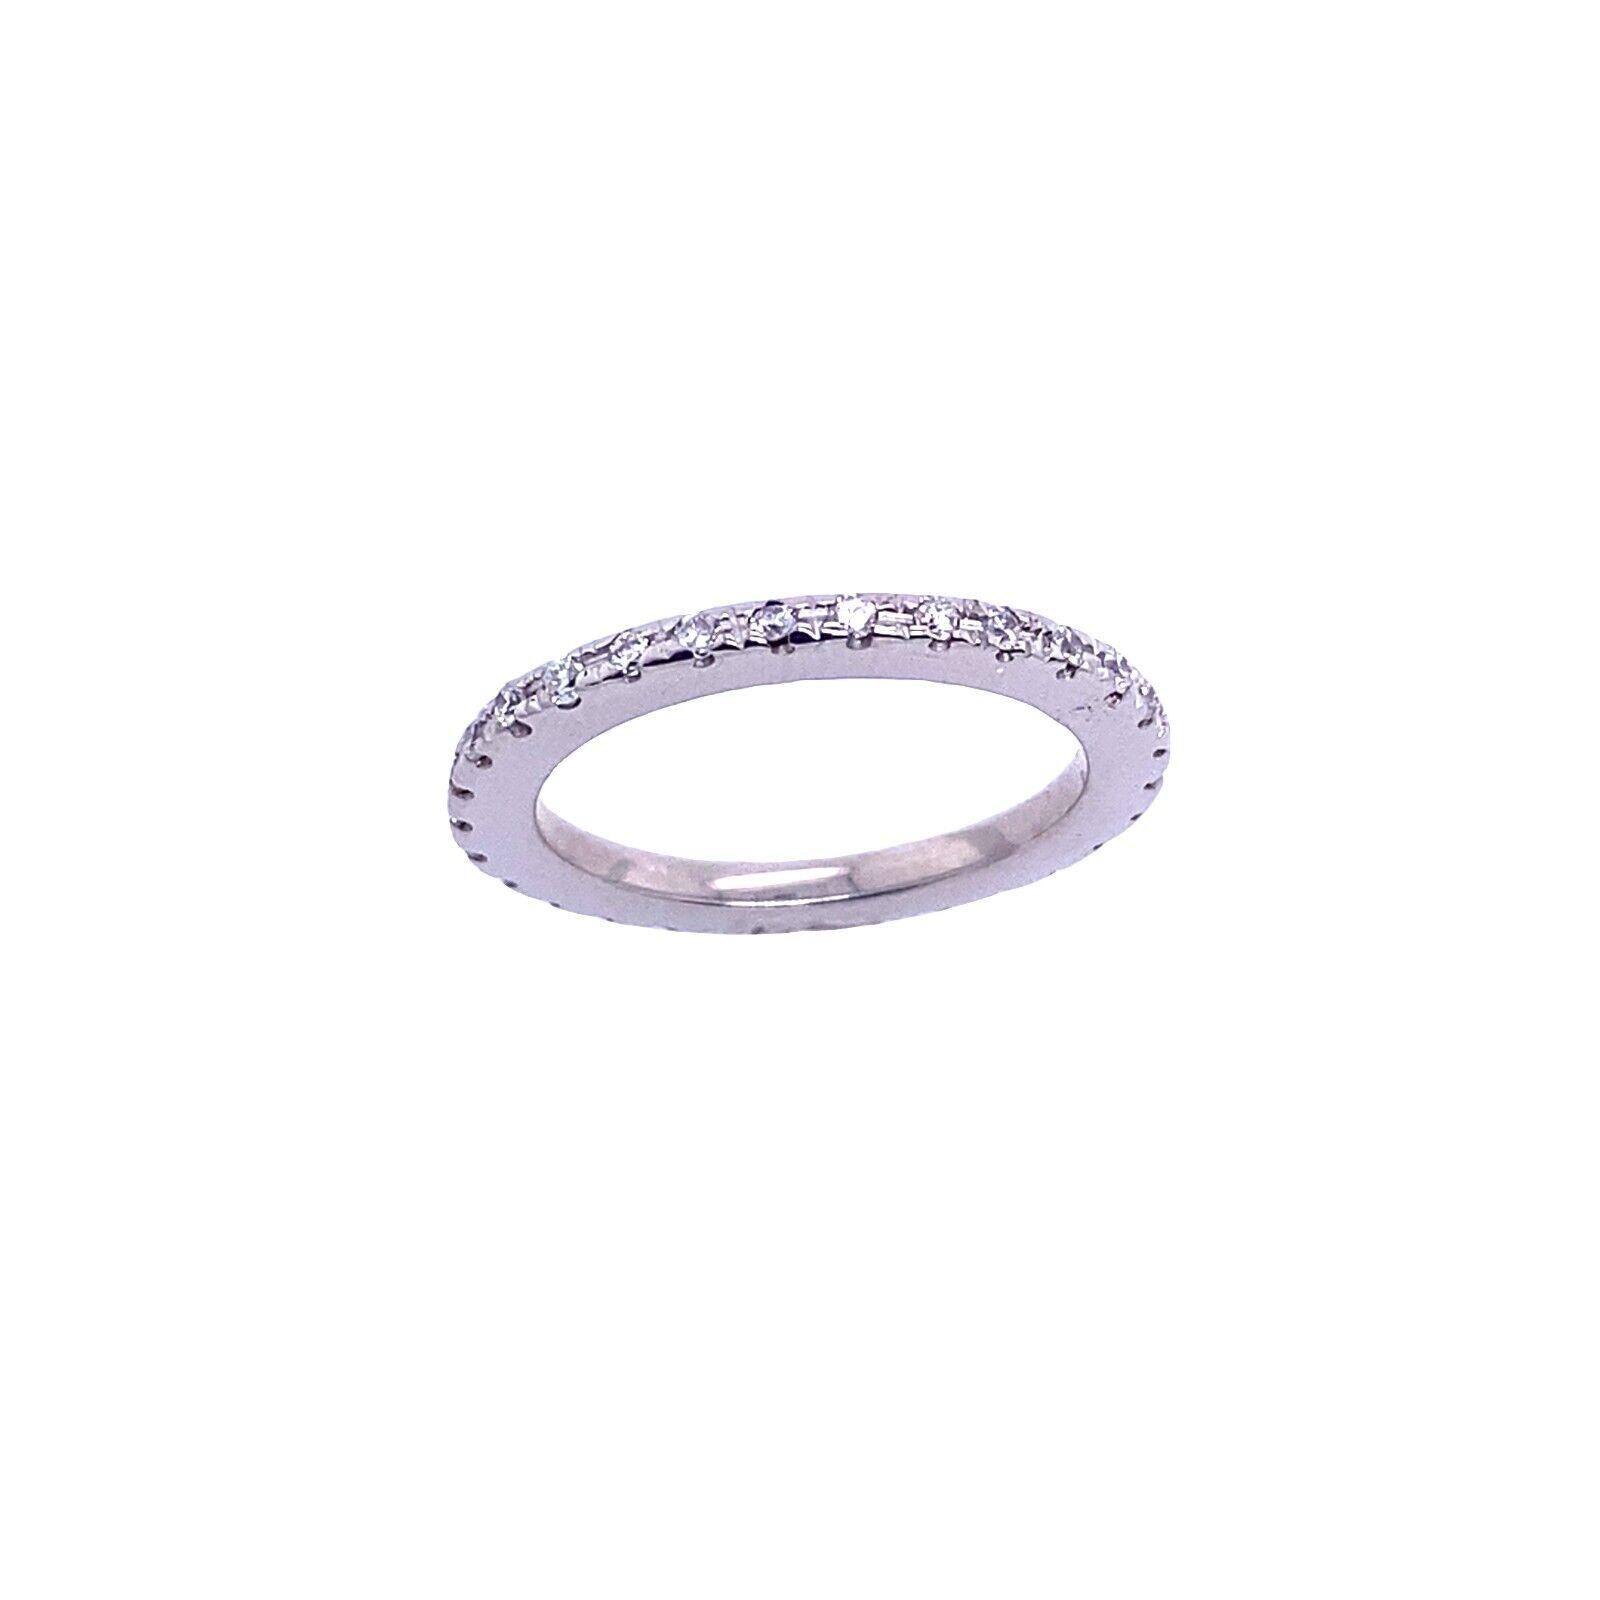 This stunning eternity ring is set with 0.30ct of diamonds in a 2mm wide band with a polished finish, full diamond band and sparkling round diamonds set around the ring.

Additional Information: 
Total Diamond Weight: 0.30ct
Diamond Colour: